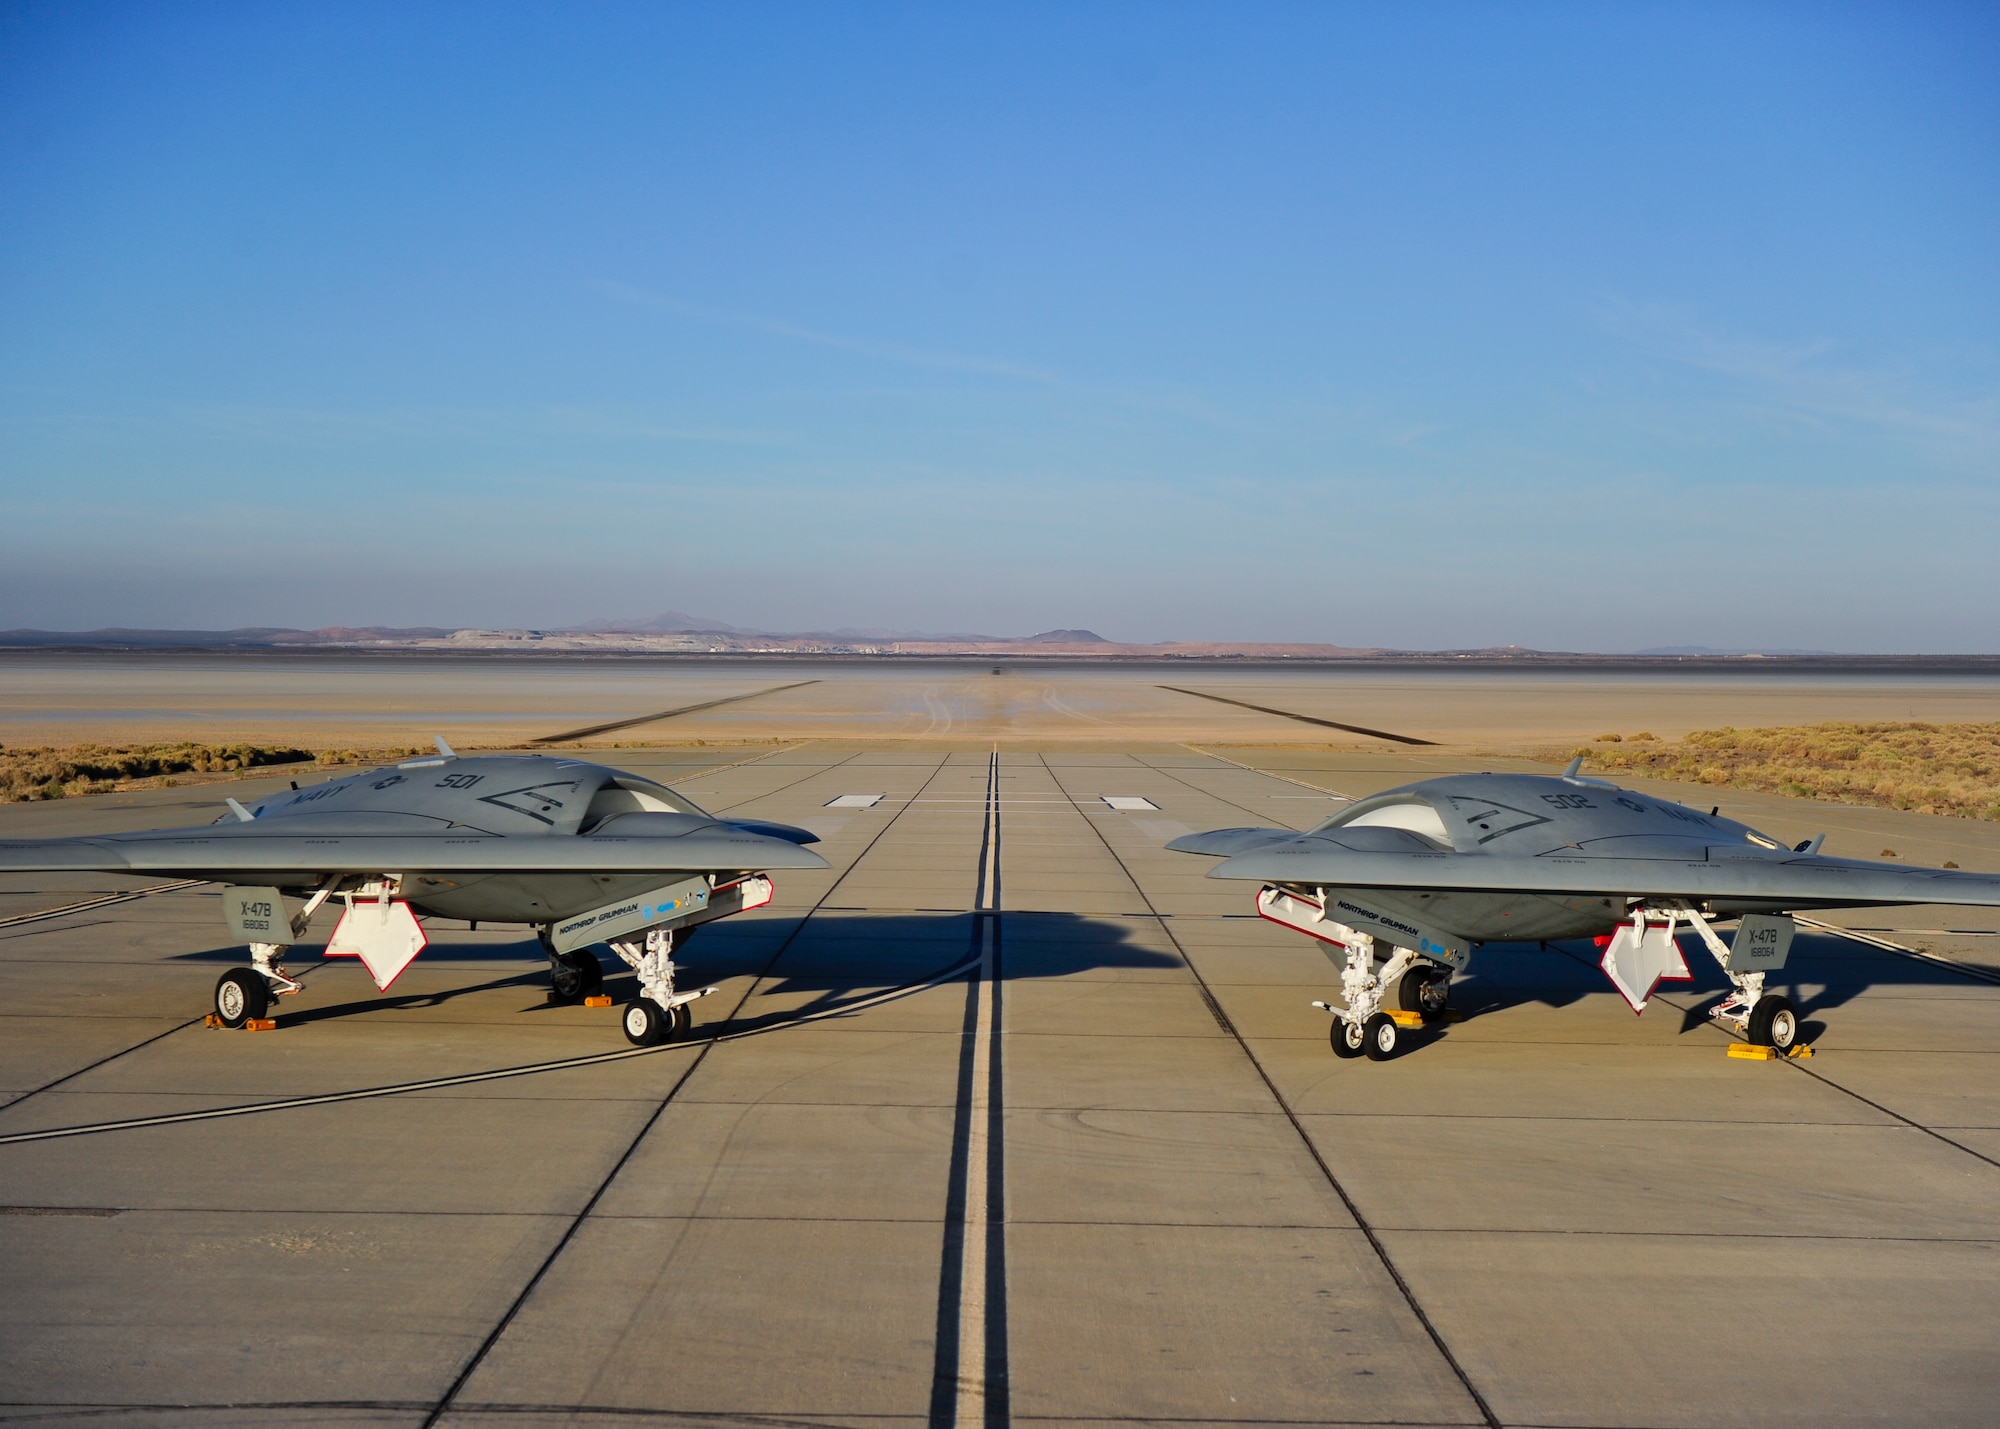 The two X-47B test aircraft pause between flight test events at Edwards AFB, Calif. The two vehicles were built by Northrop Grumman at Palmdale, California and performed all of their initial flight testing at Edwards AFB before transitioning to NAS Patuxent River in Maryland. (Northrop Grumman photo by Alan Radecki)